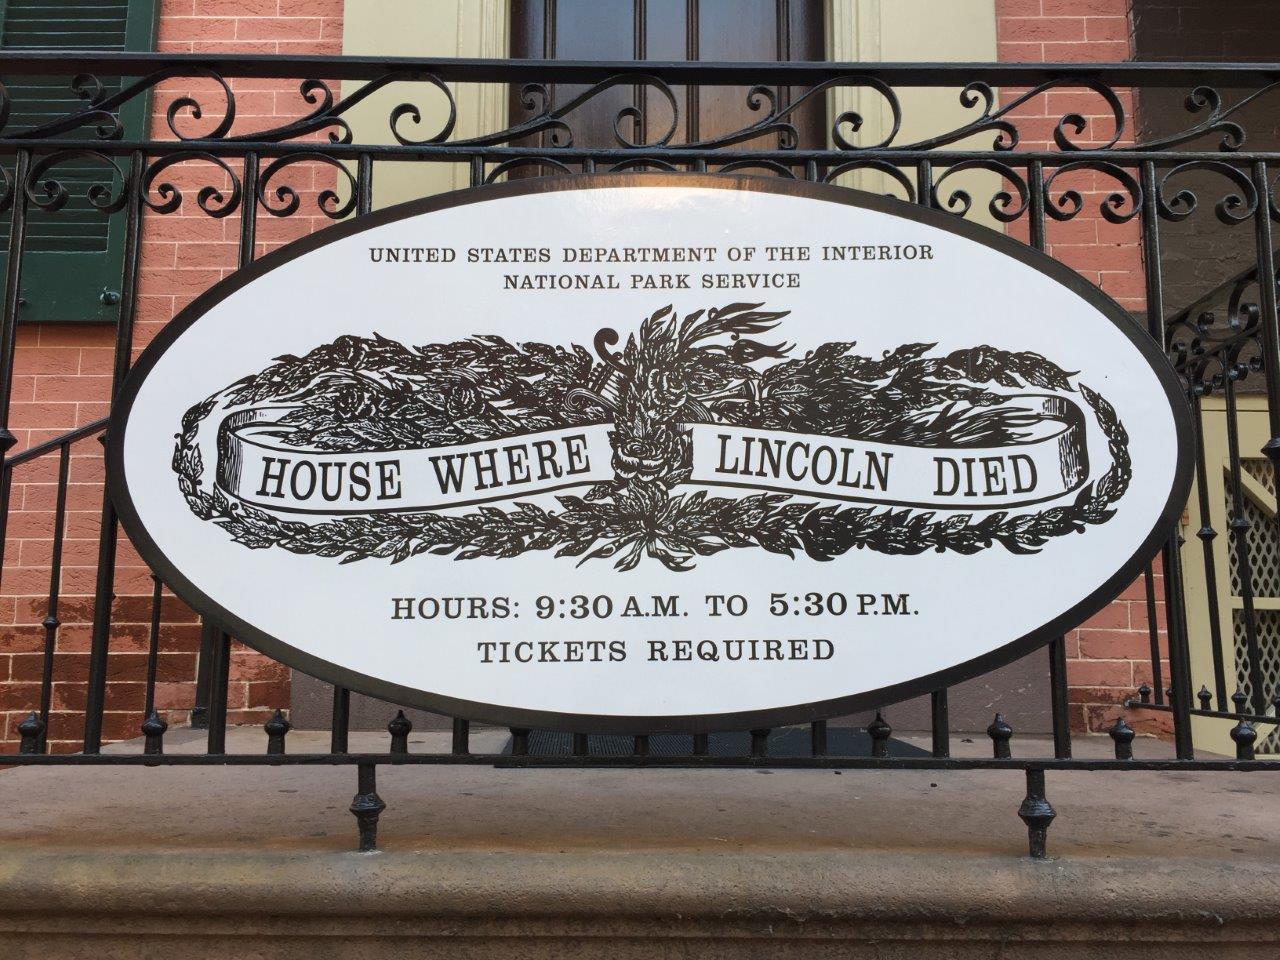 Petersen house - house where Lincoln died